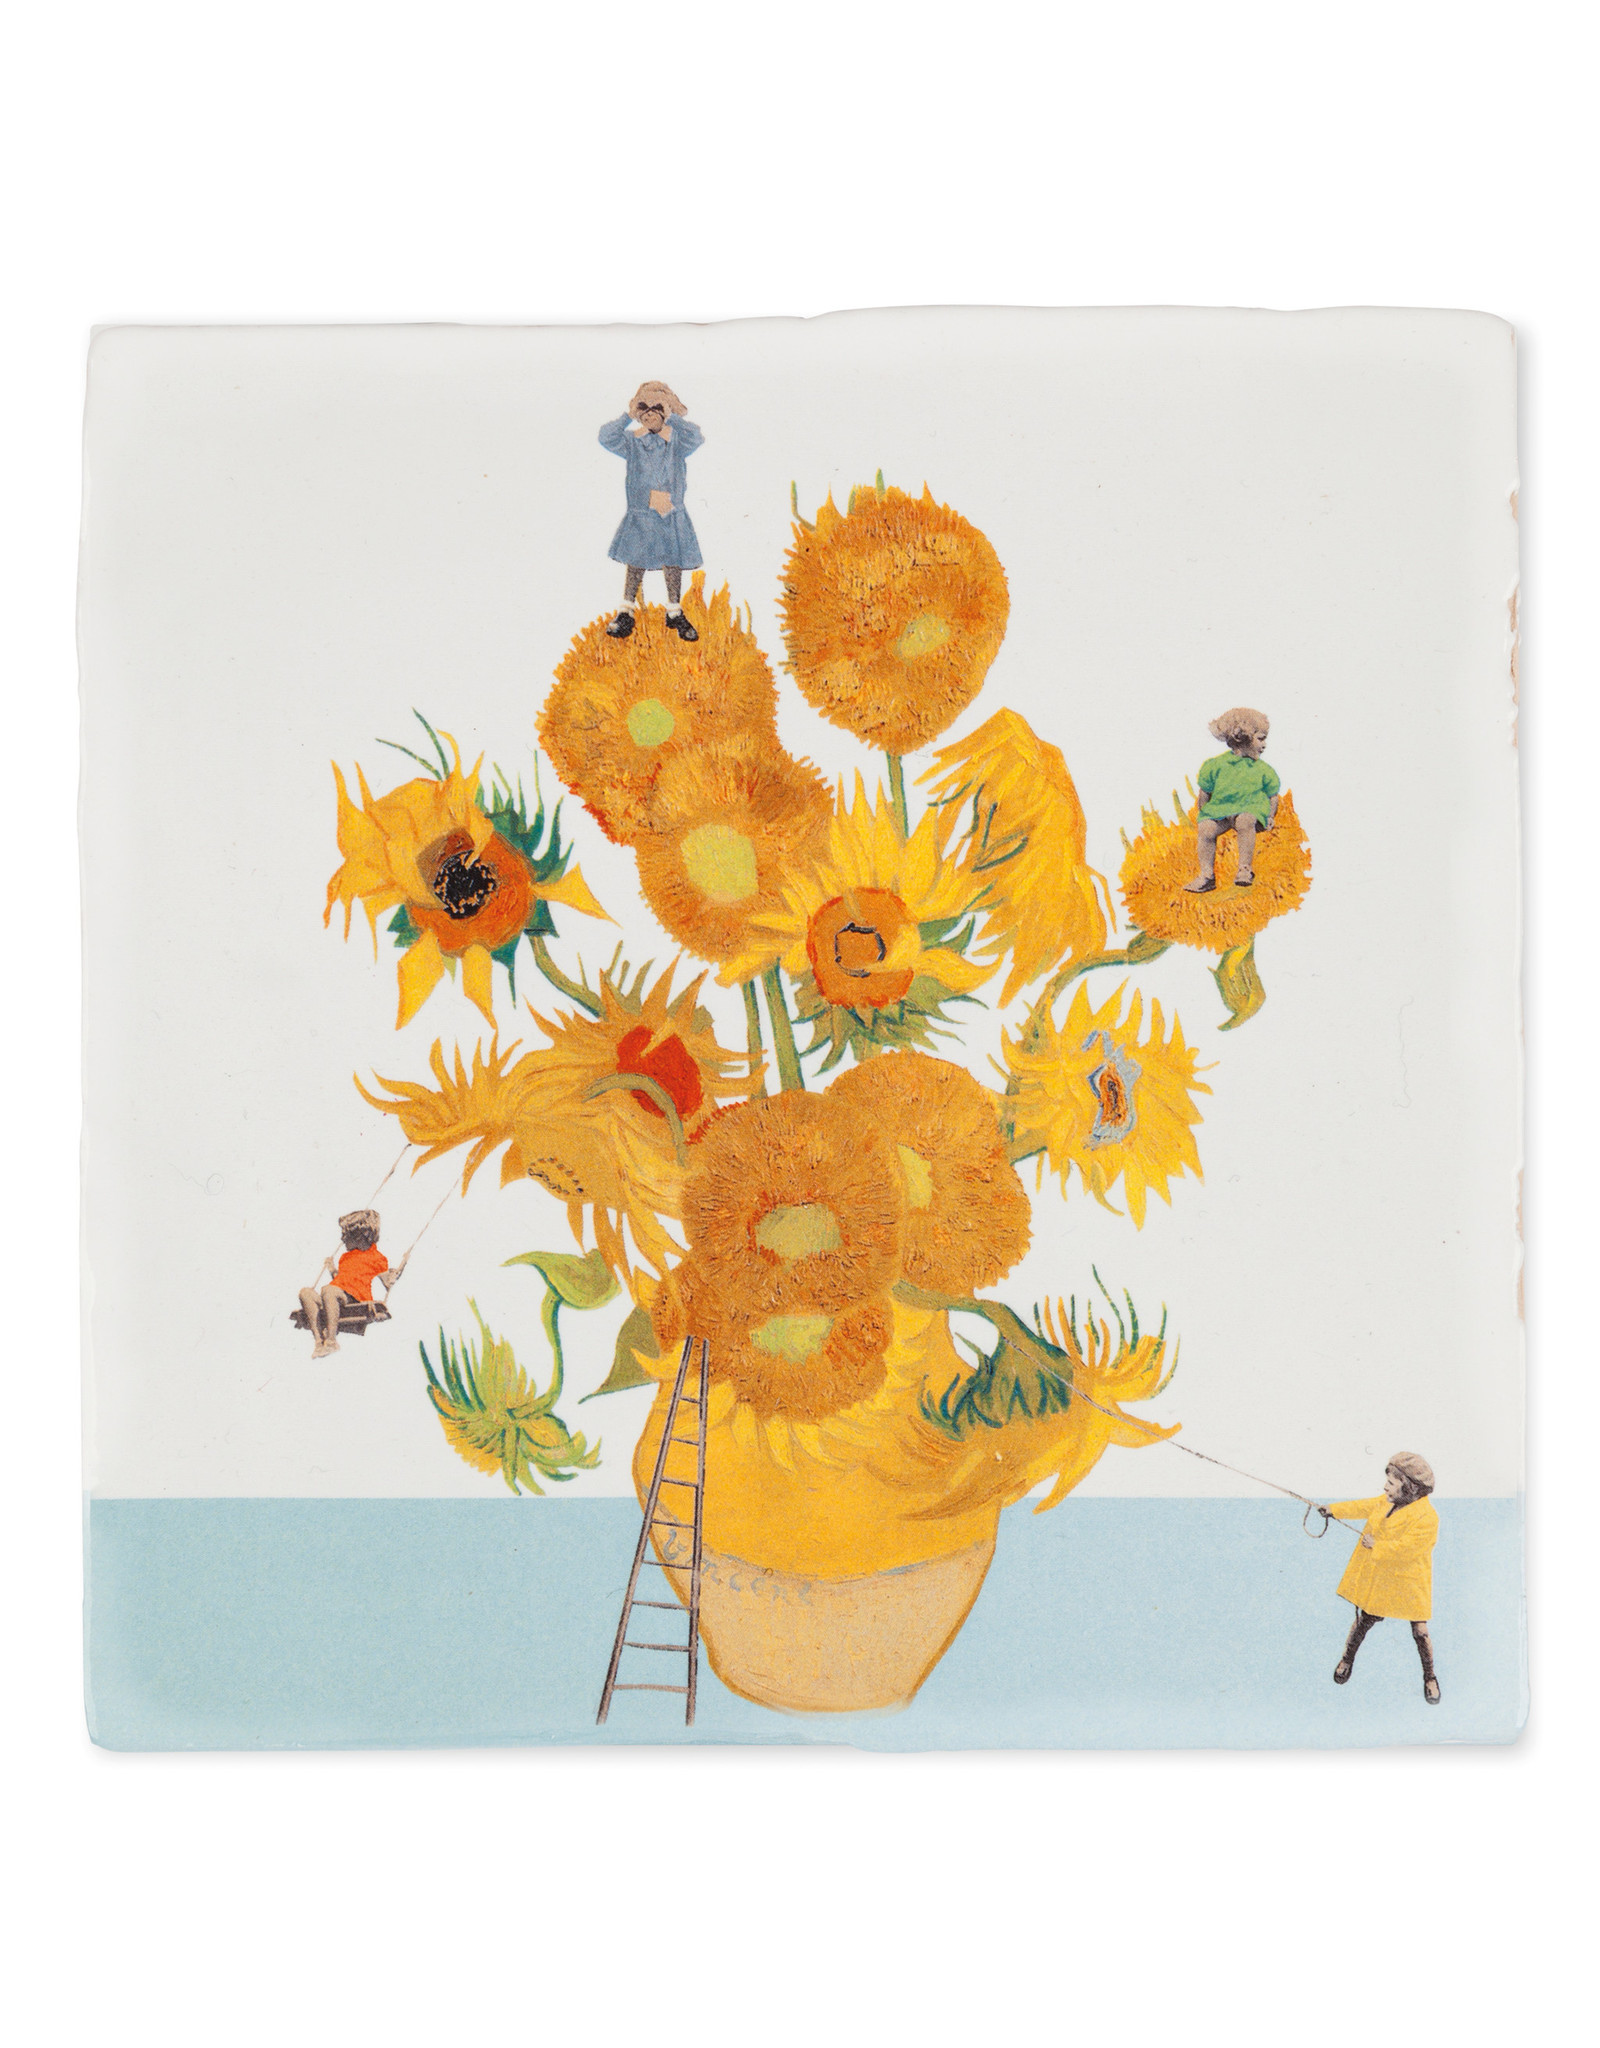 Storytiles Tegel - The Sunflower Expedition